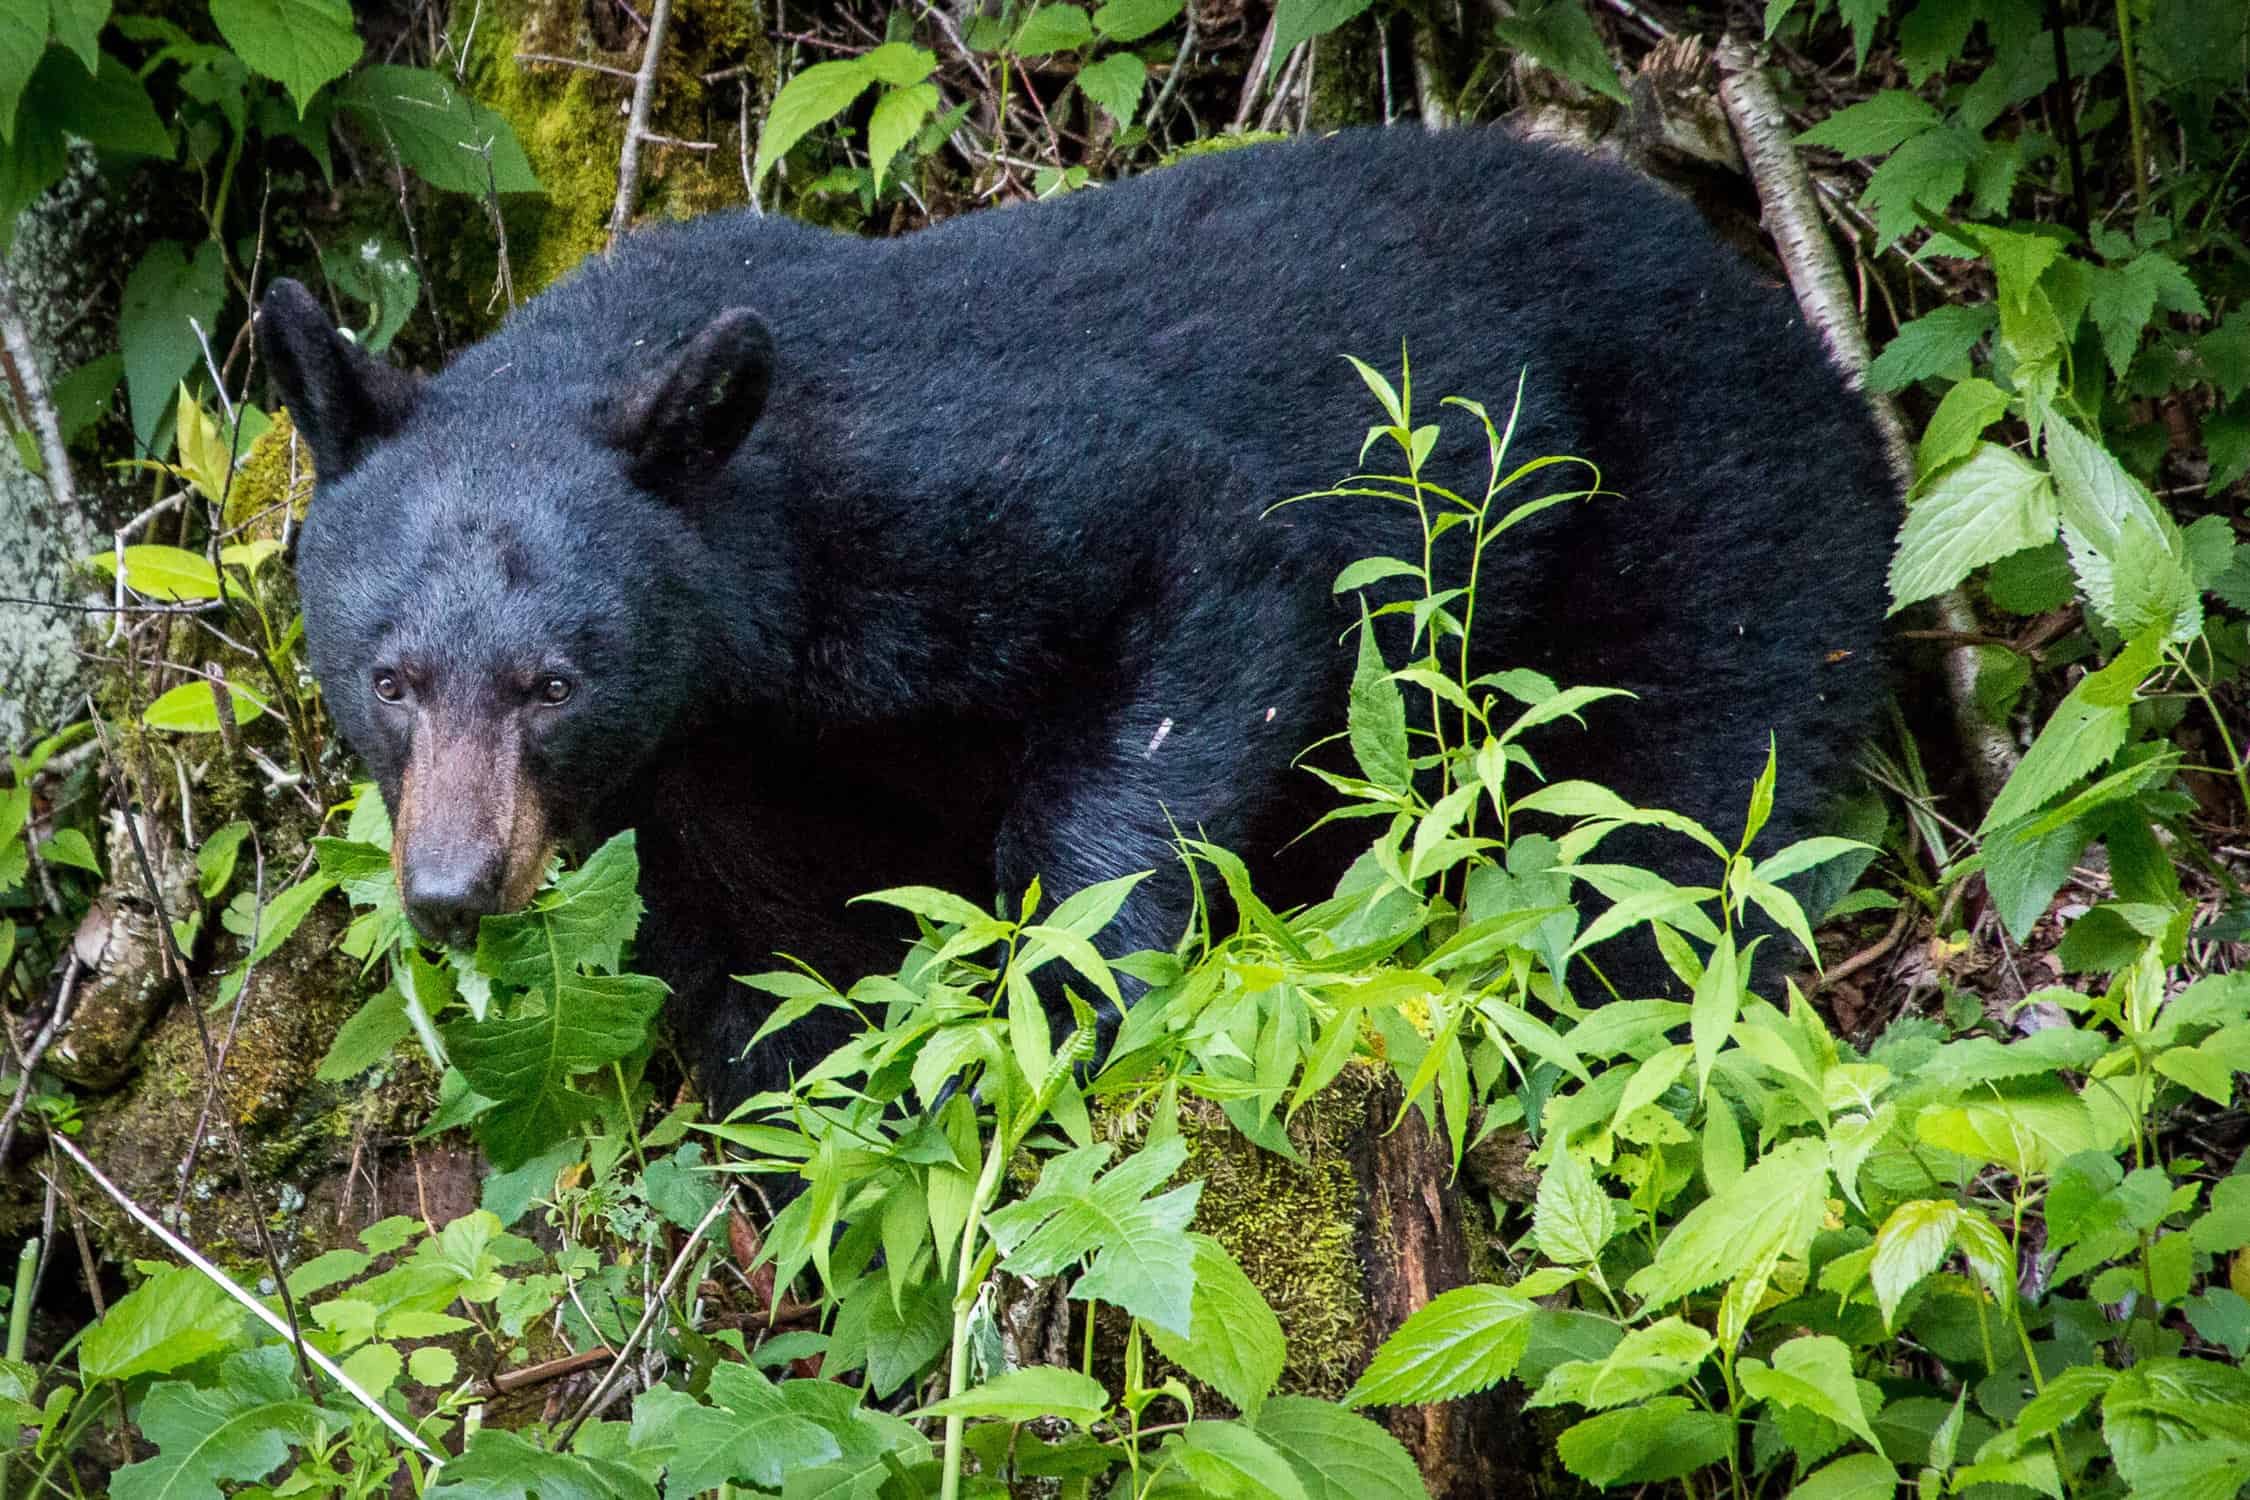 Bears in Great Smoky Mountains National Park